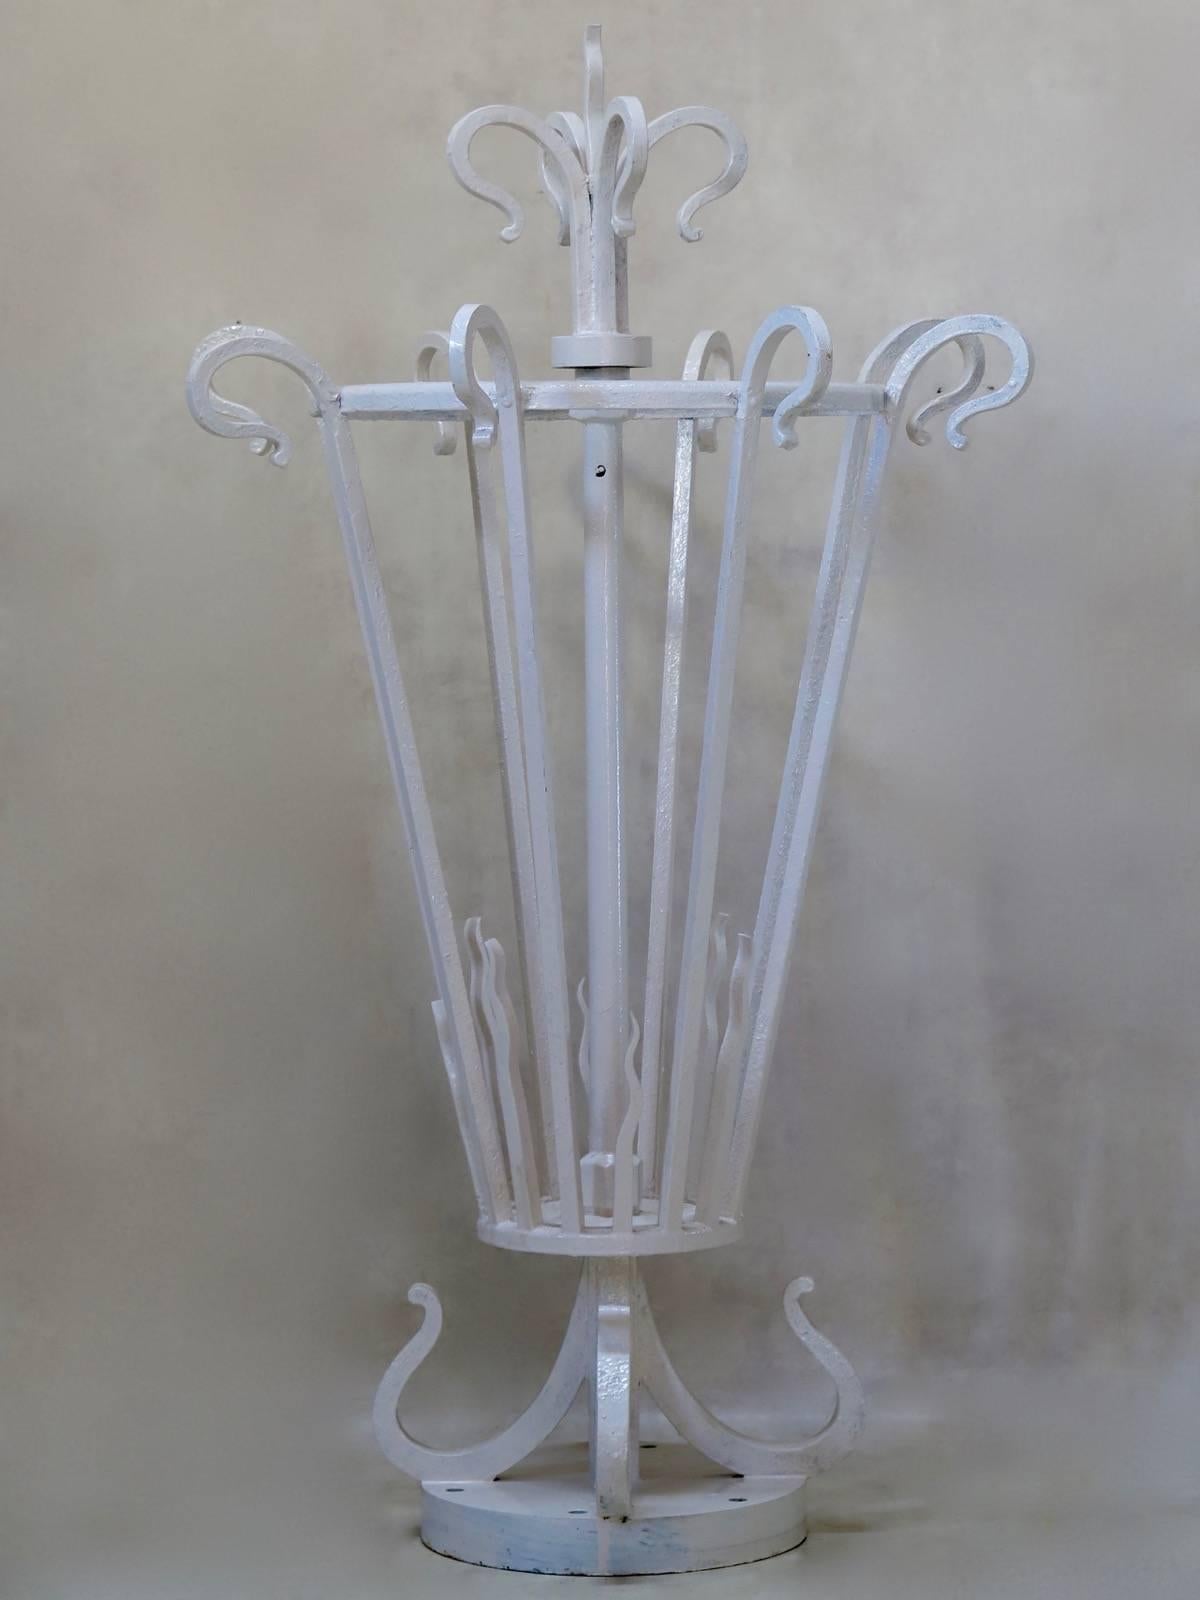 Tall and elegant wrought iron lantern, originally designed to be placed atop a masonry column. Very heavy. The base is pierced with holes to secure into place. Topped with stylized fleur-de-lys finials. The central shaft is hollow, to thread wiring